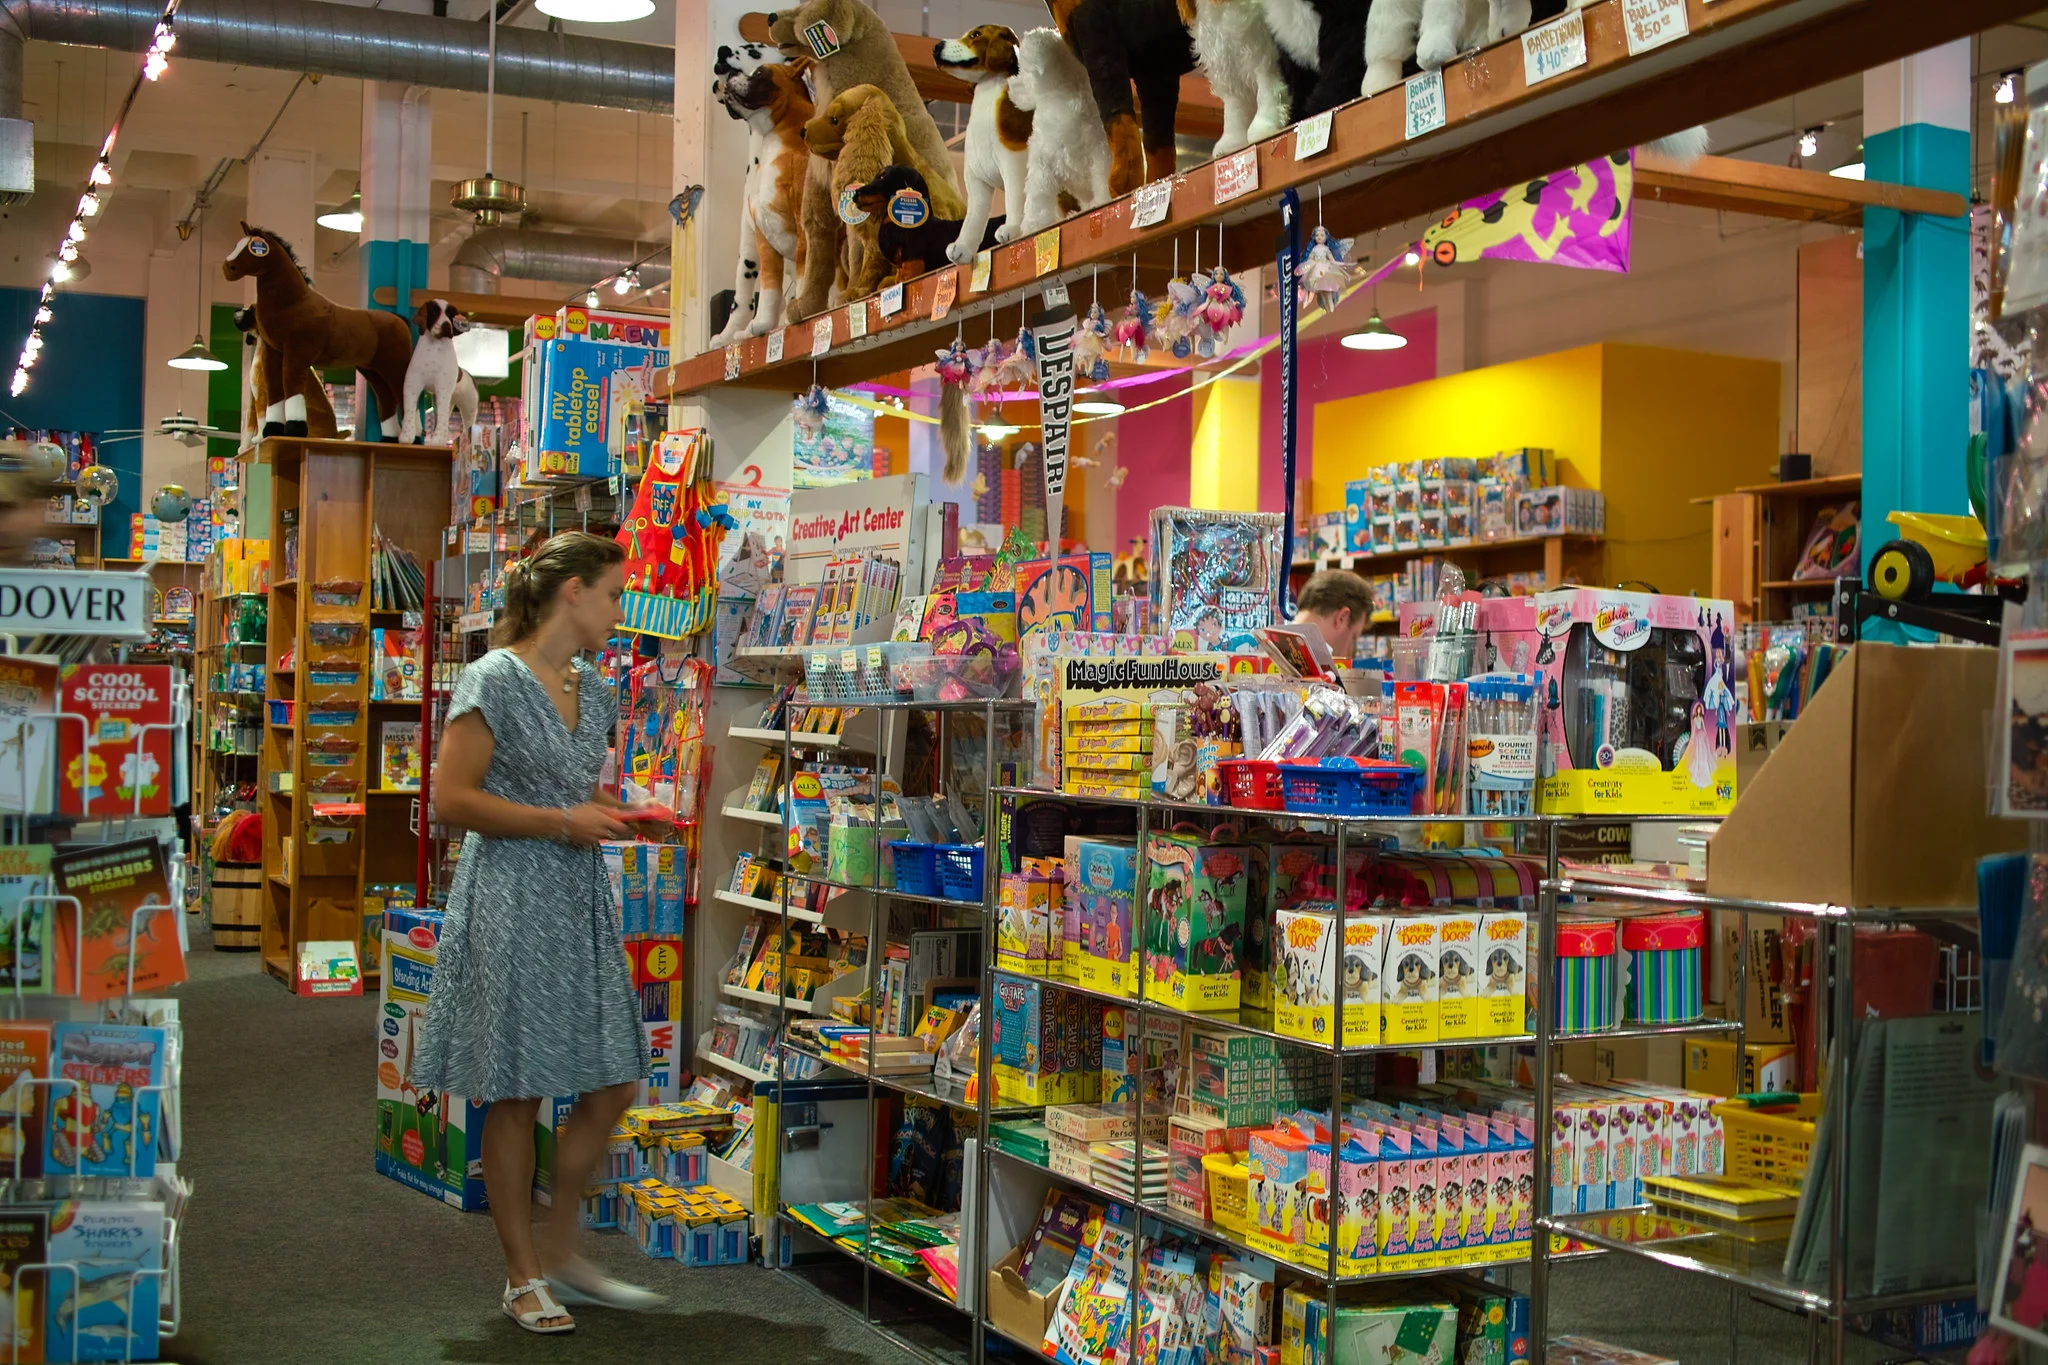 A woman wearing dress choosing from various toys displayed in shelves at Finnegan’s Toys & Gifts in Portland, one of the best toy stores in America